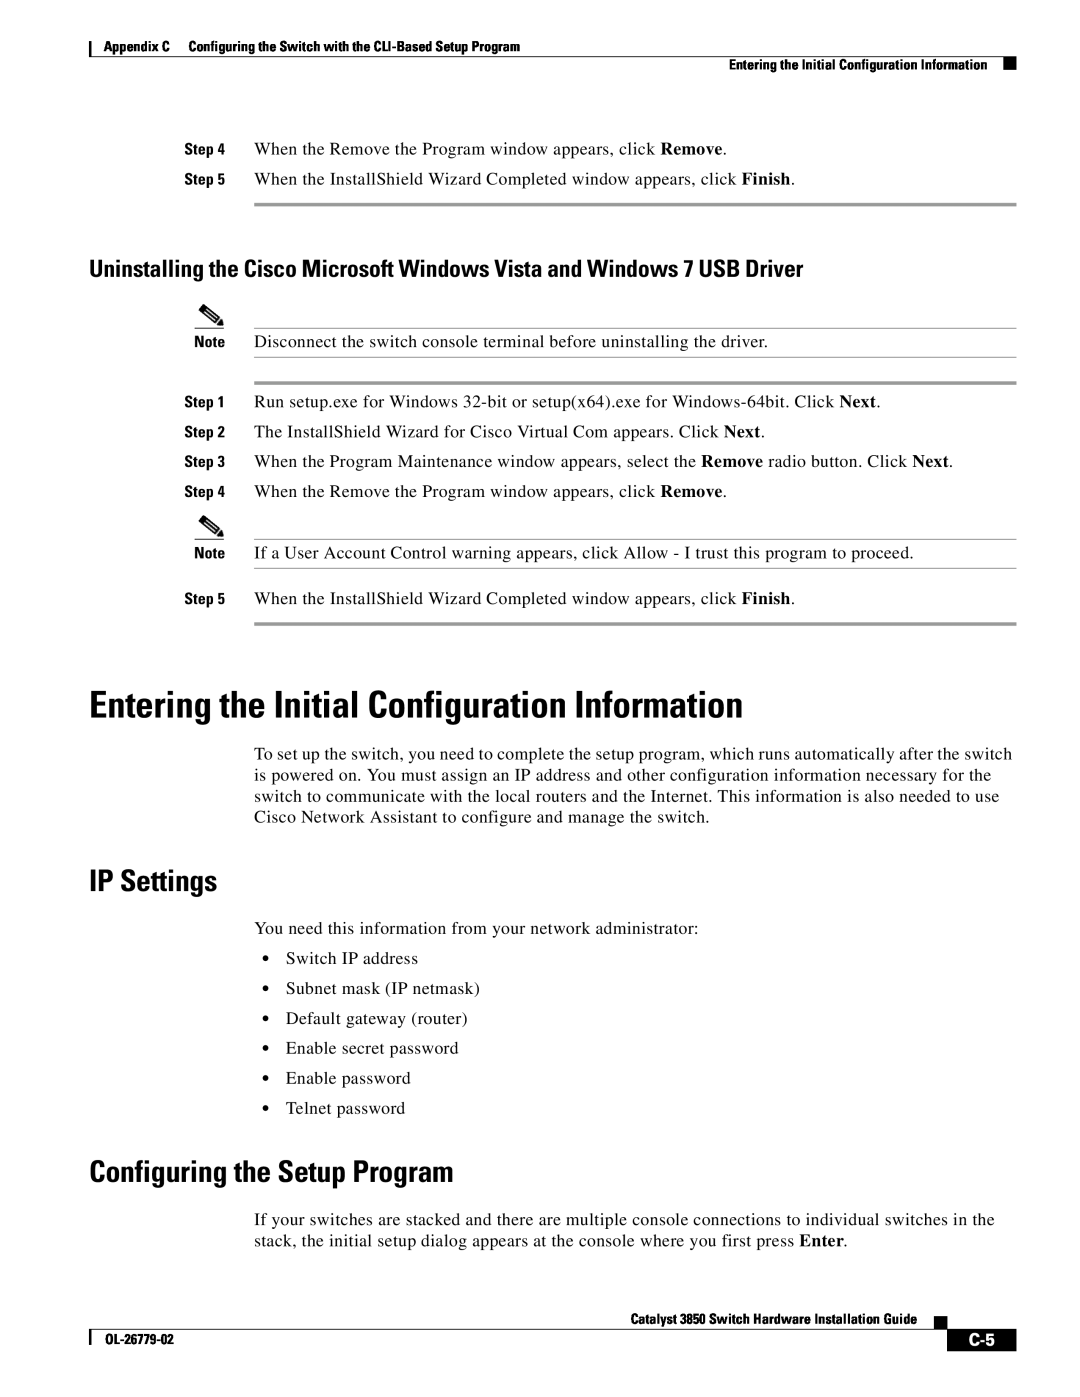 Cisco Systems WSC385024TS manual Entering the Initial Configuration Information, IP Settings, Configuring the Setup Program 